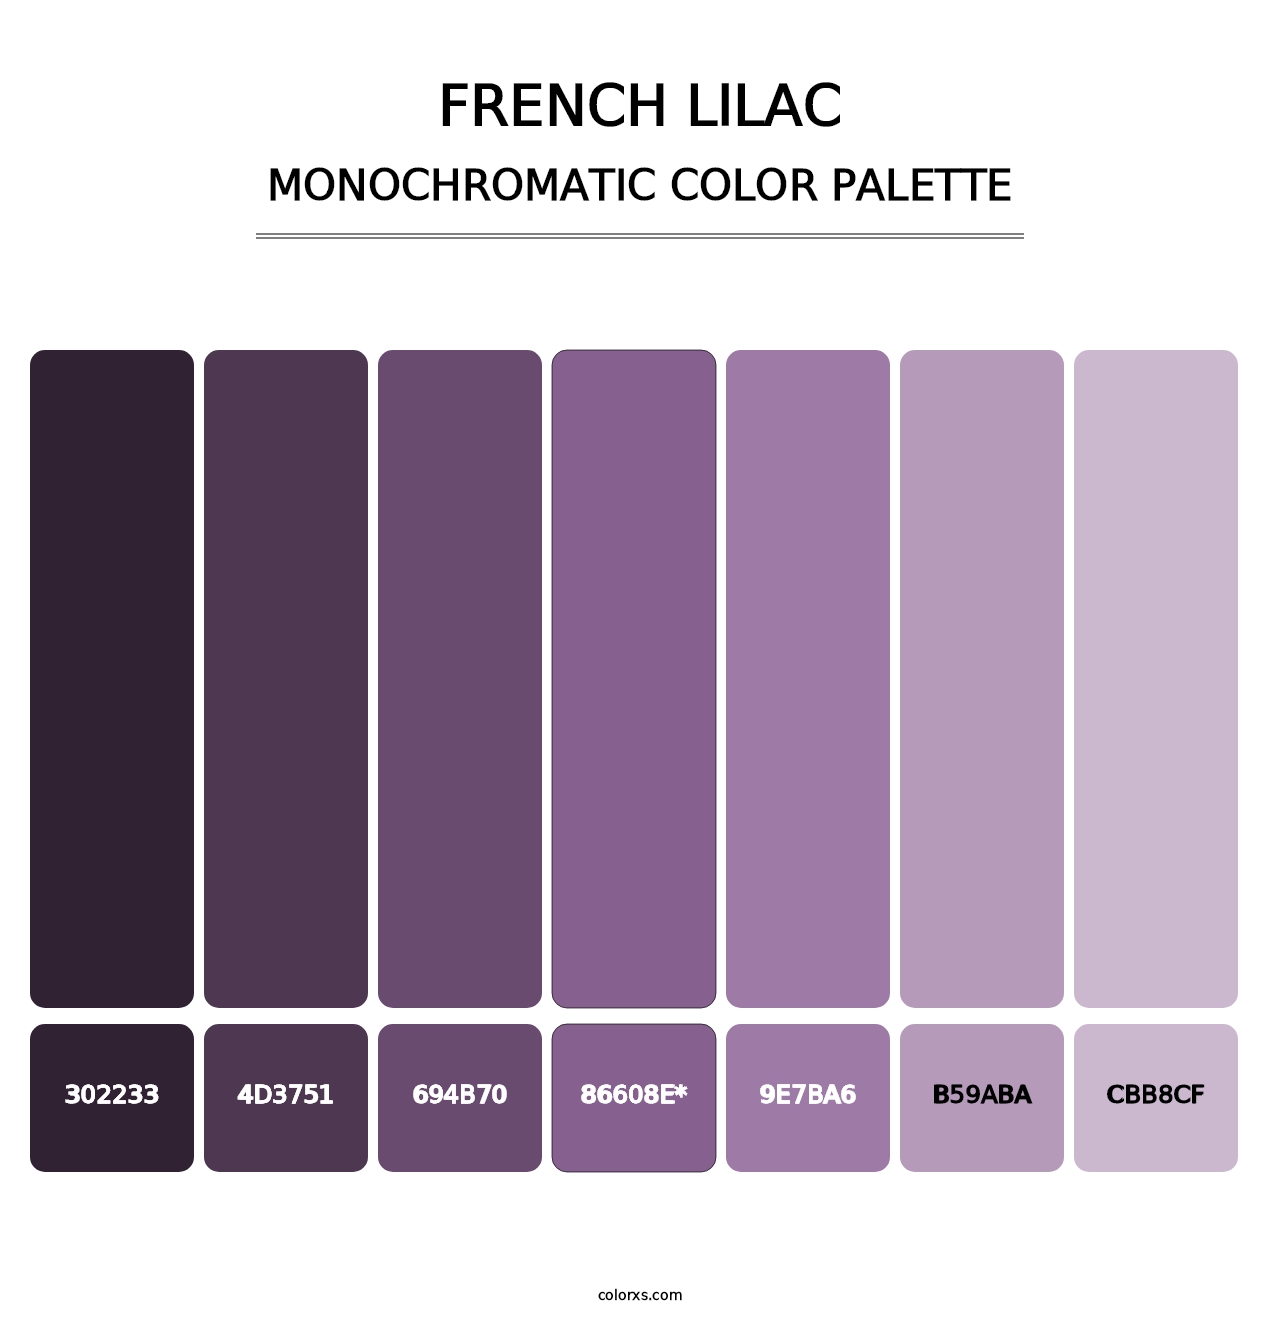 French Lilac - Monochromatic Color Palette